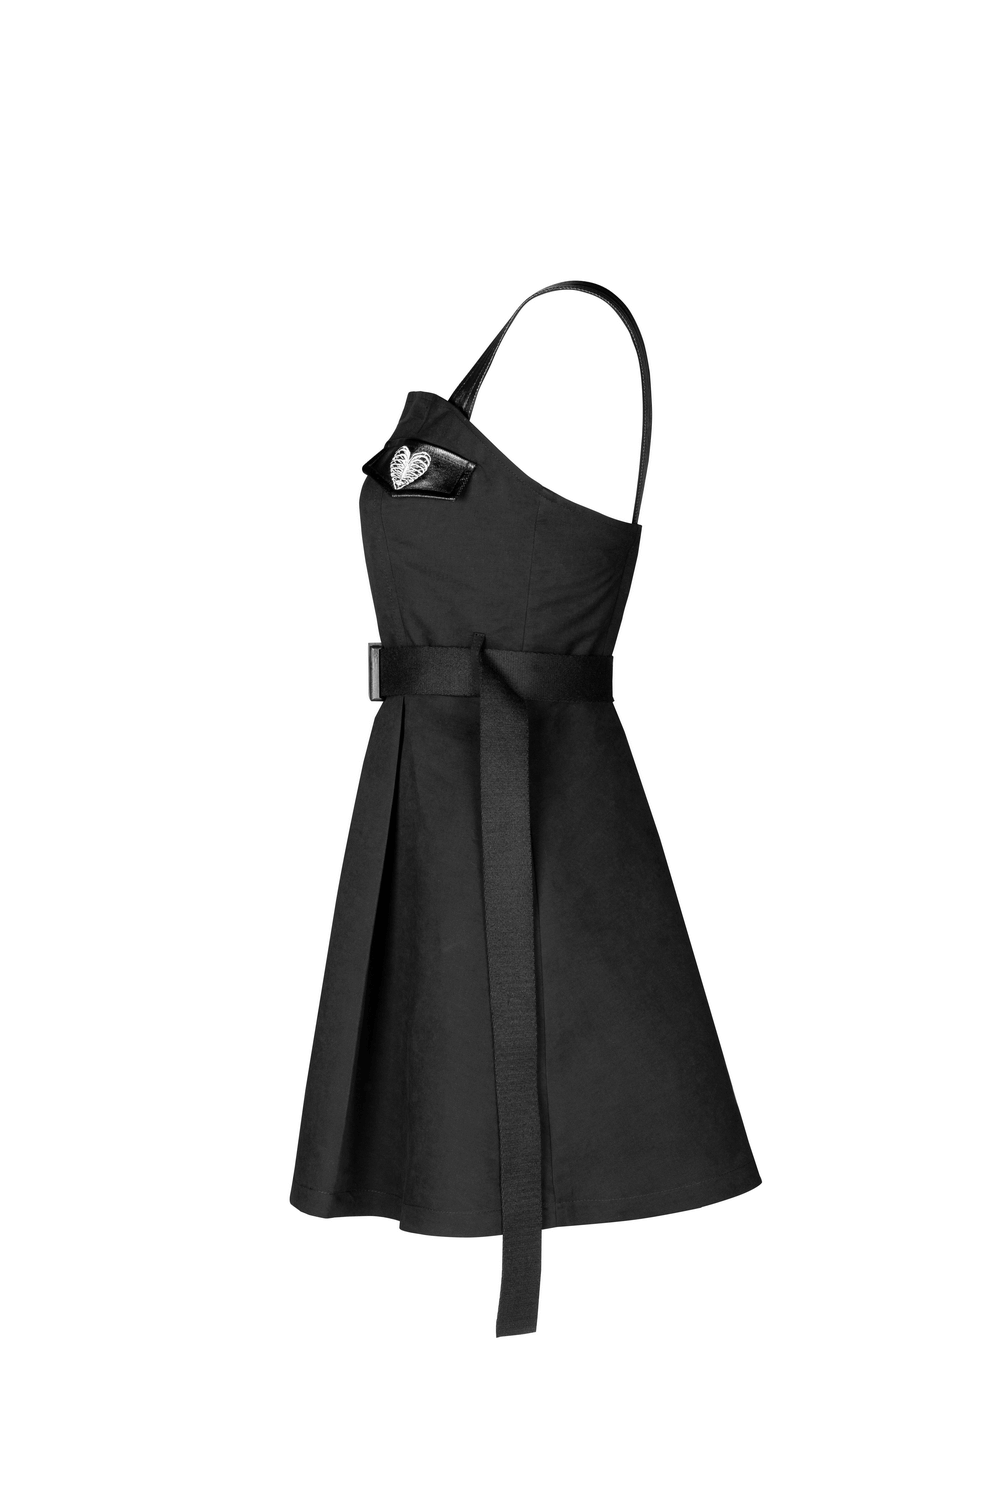 Gothic Punk Sleeveless Dress with Belt and Embroidery - HARD'N'HEAVY